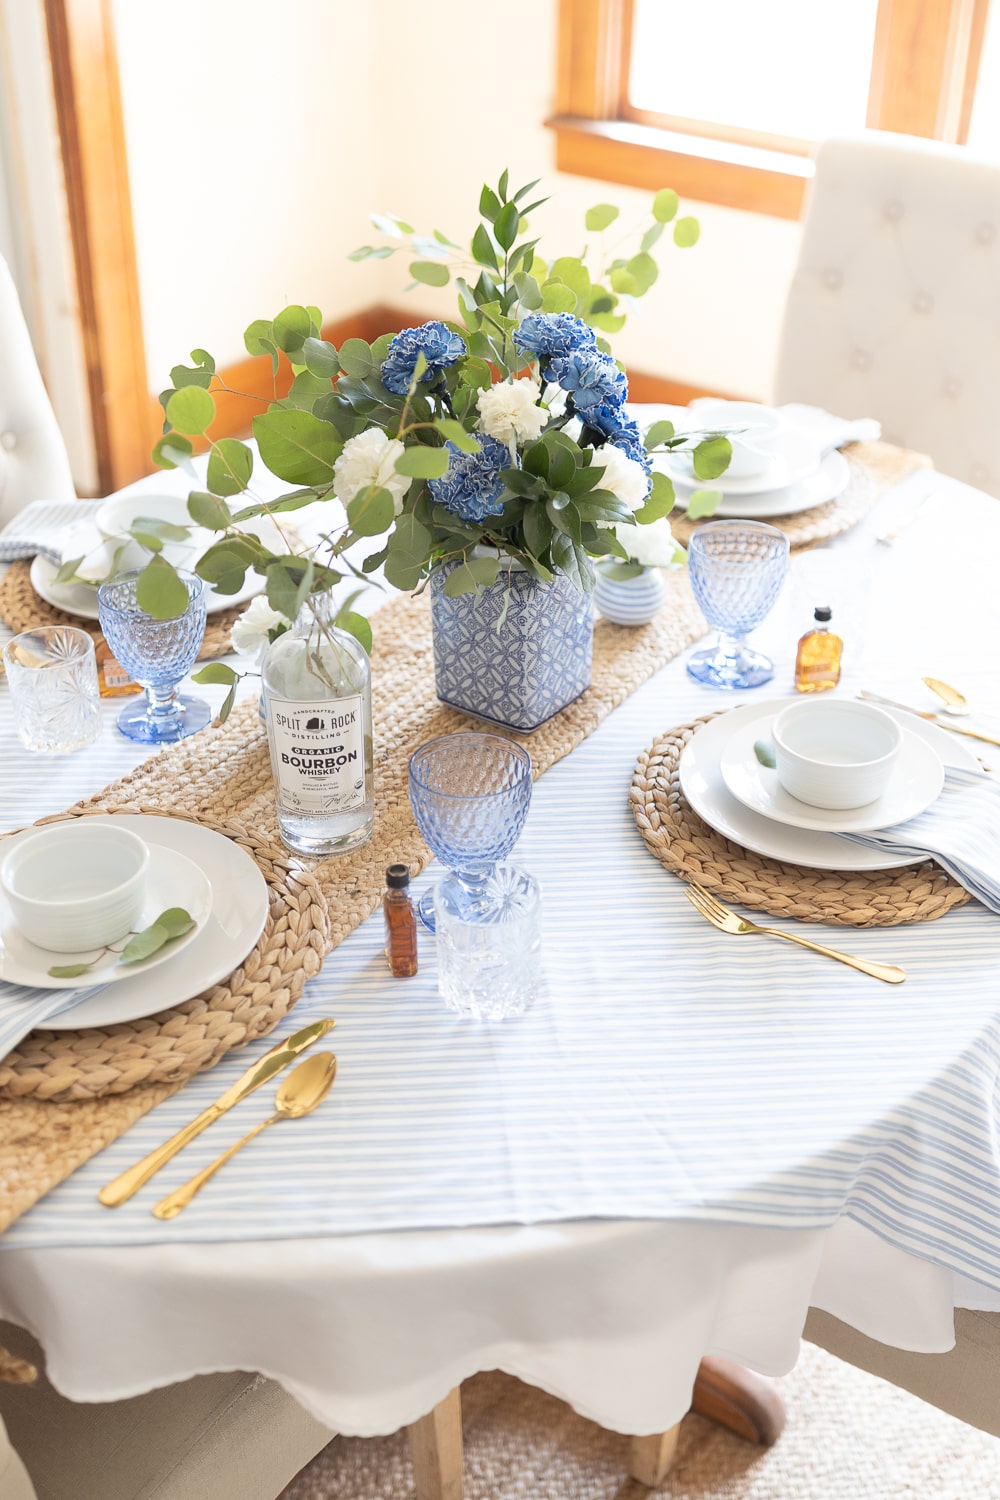 Father's day table setting ideas by blogger Stephanie Ziajka on Diary of a Debutante